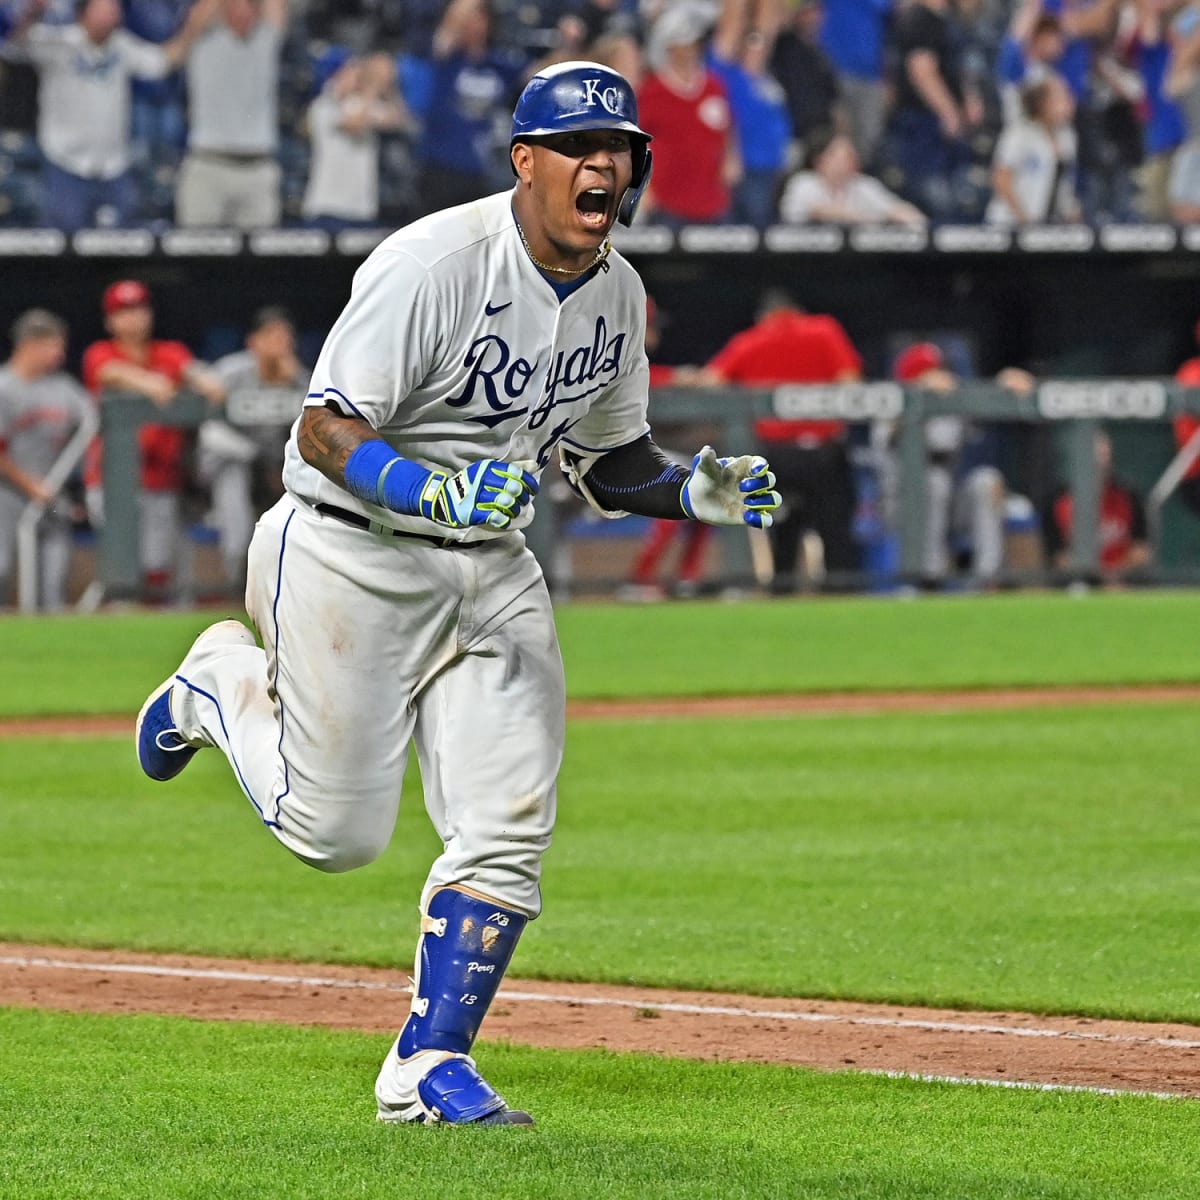 KC Royals Catcher Salvador Perez's Record-Breaking Feat Is More